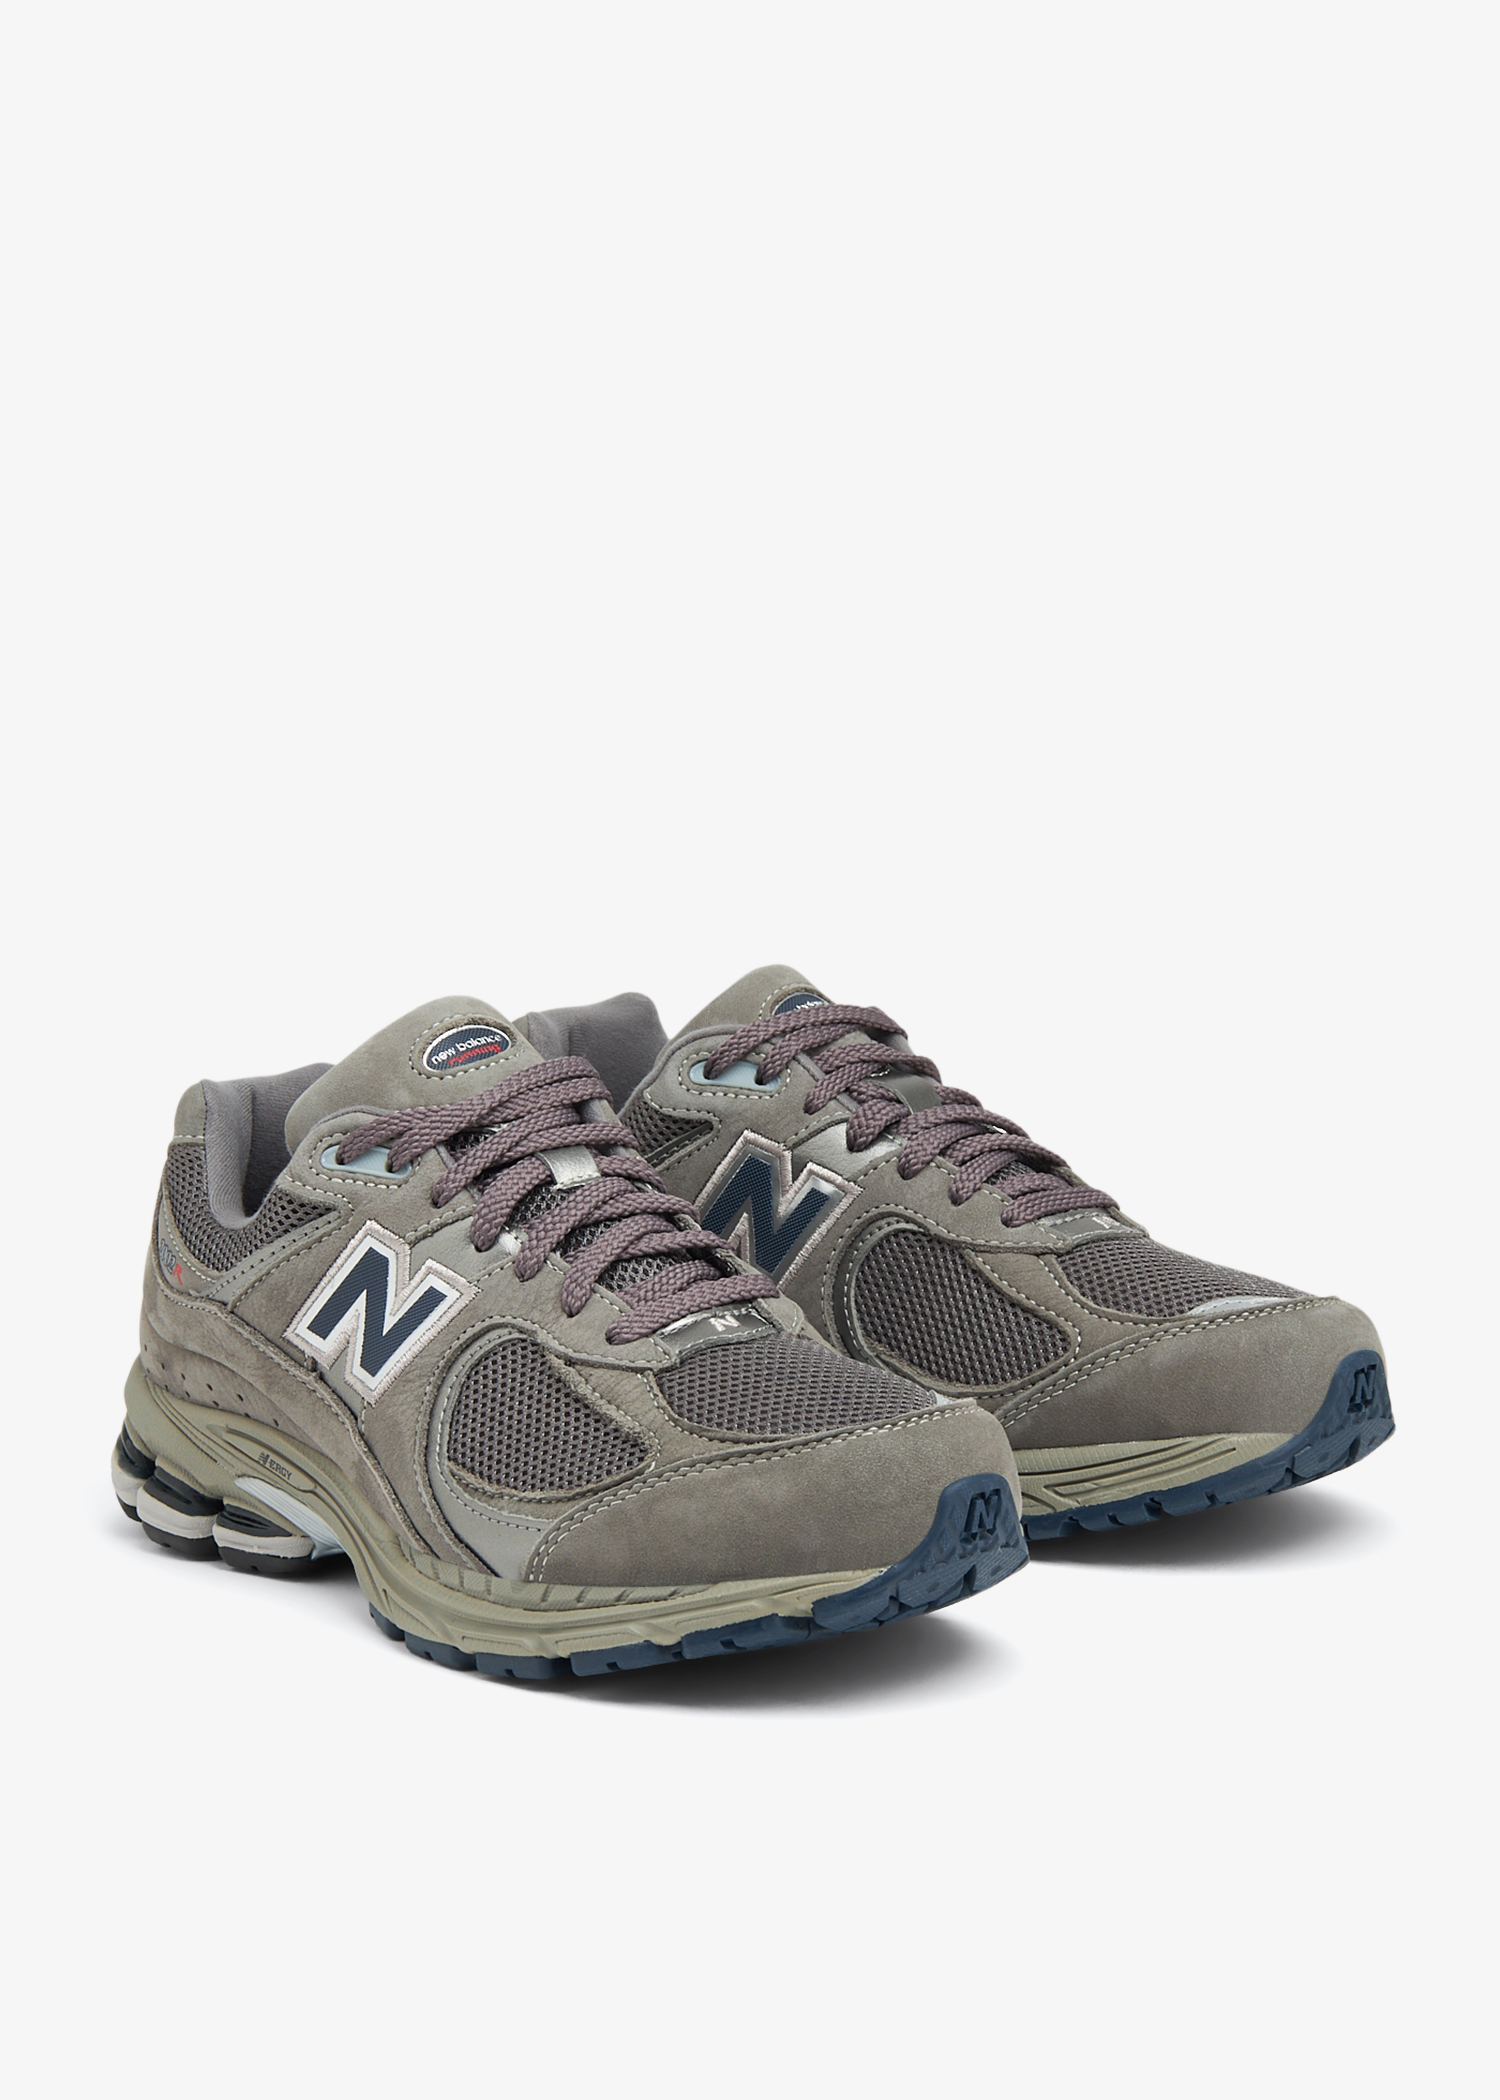 New Balance 2002R sneakers for Men - Grey in UAE | Level Shoes